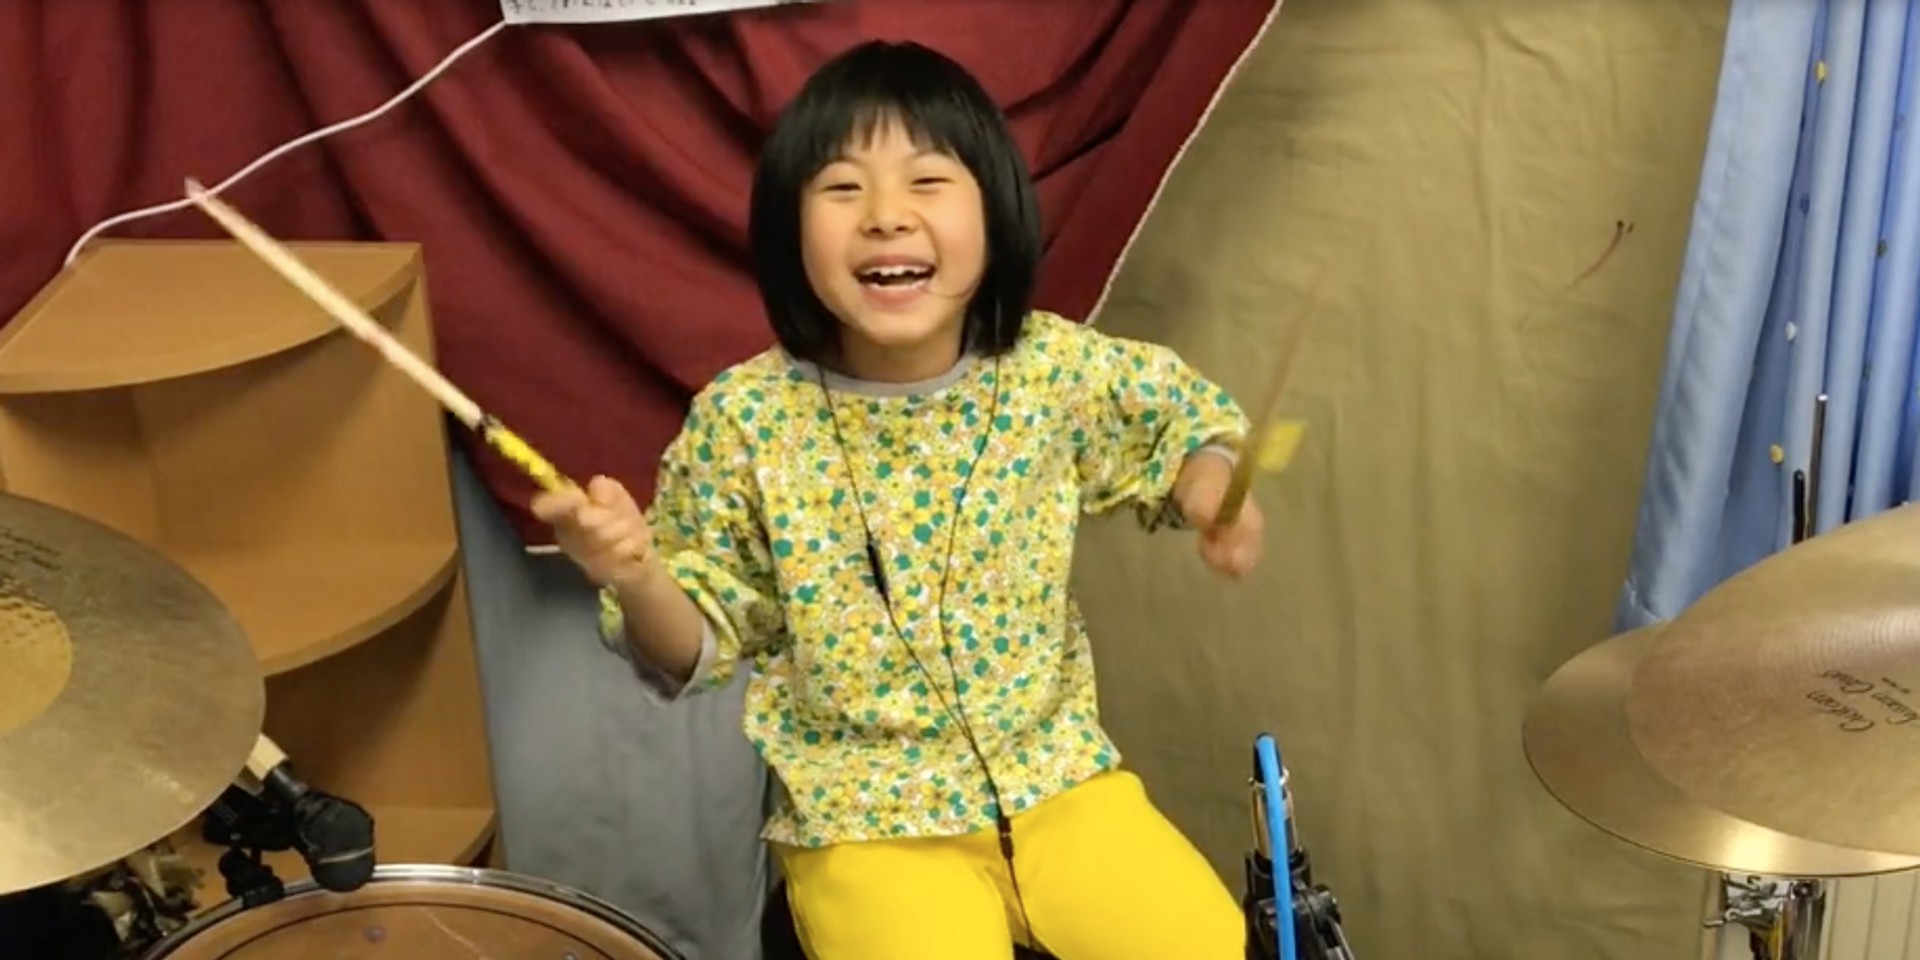 8-year-old girl does a smashing cover of Led Zeppelin’s ‘Good Times Bad Times’ – watch